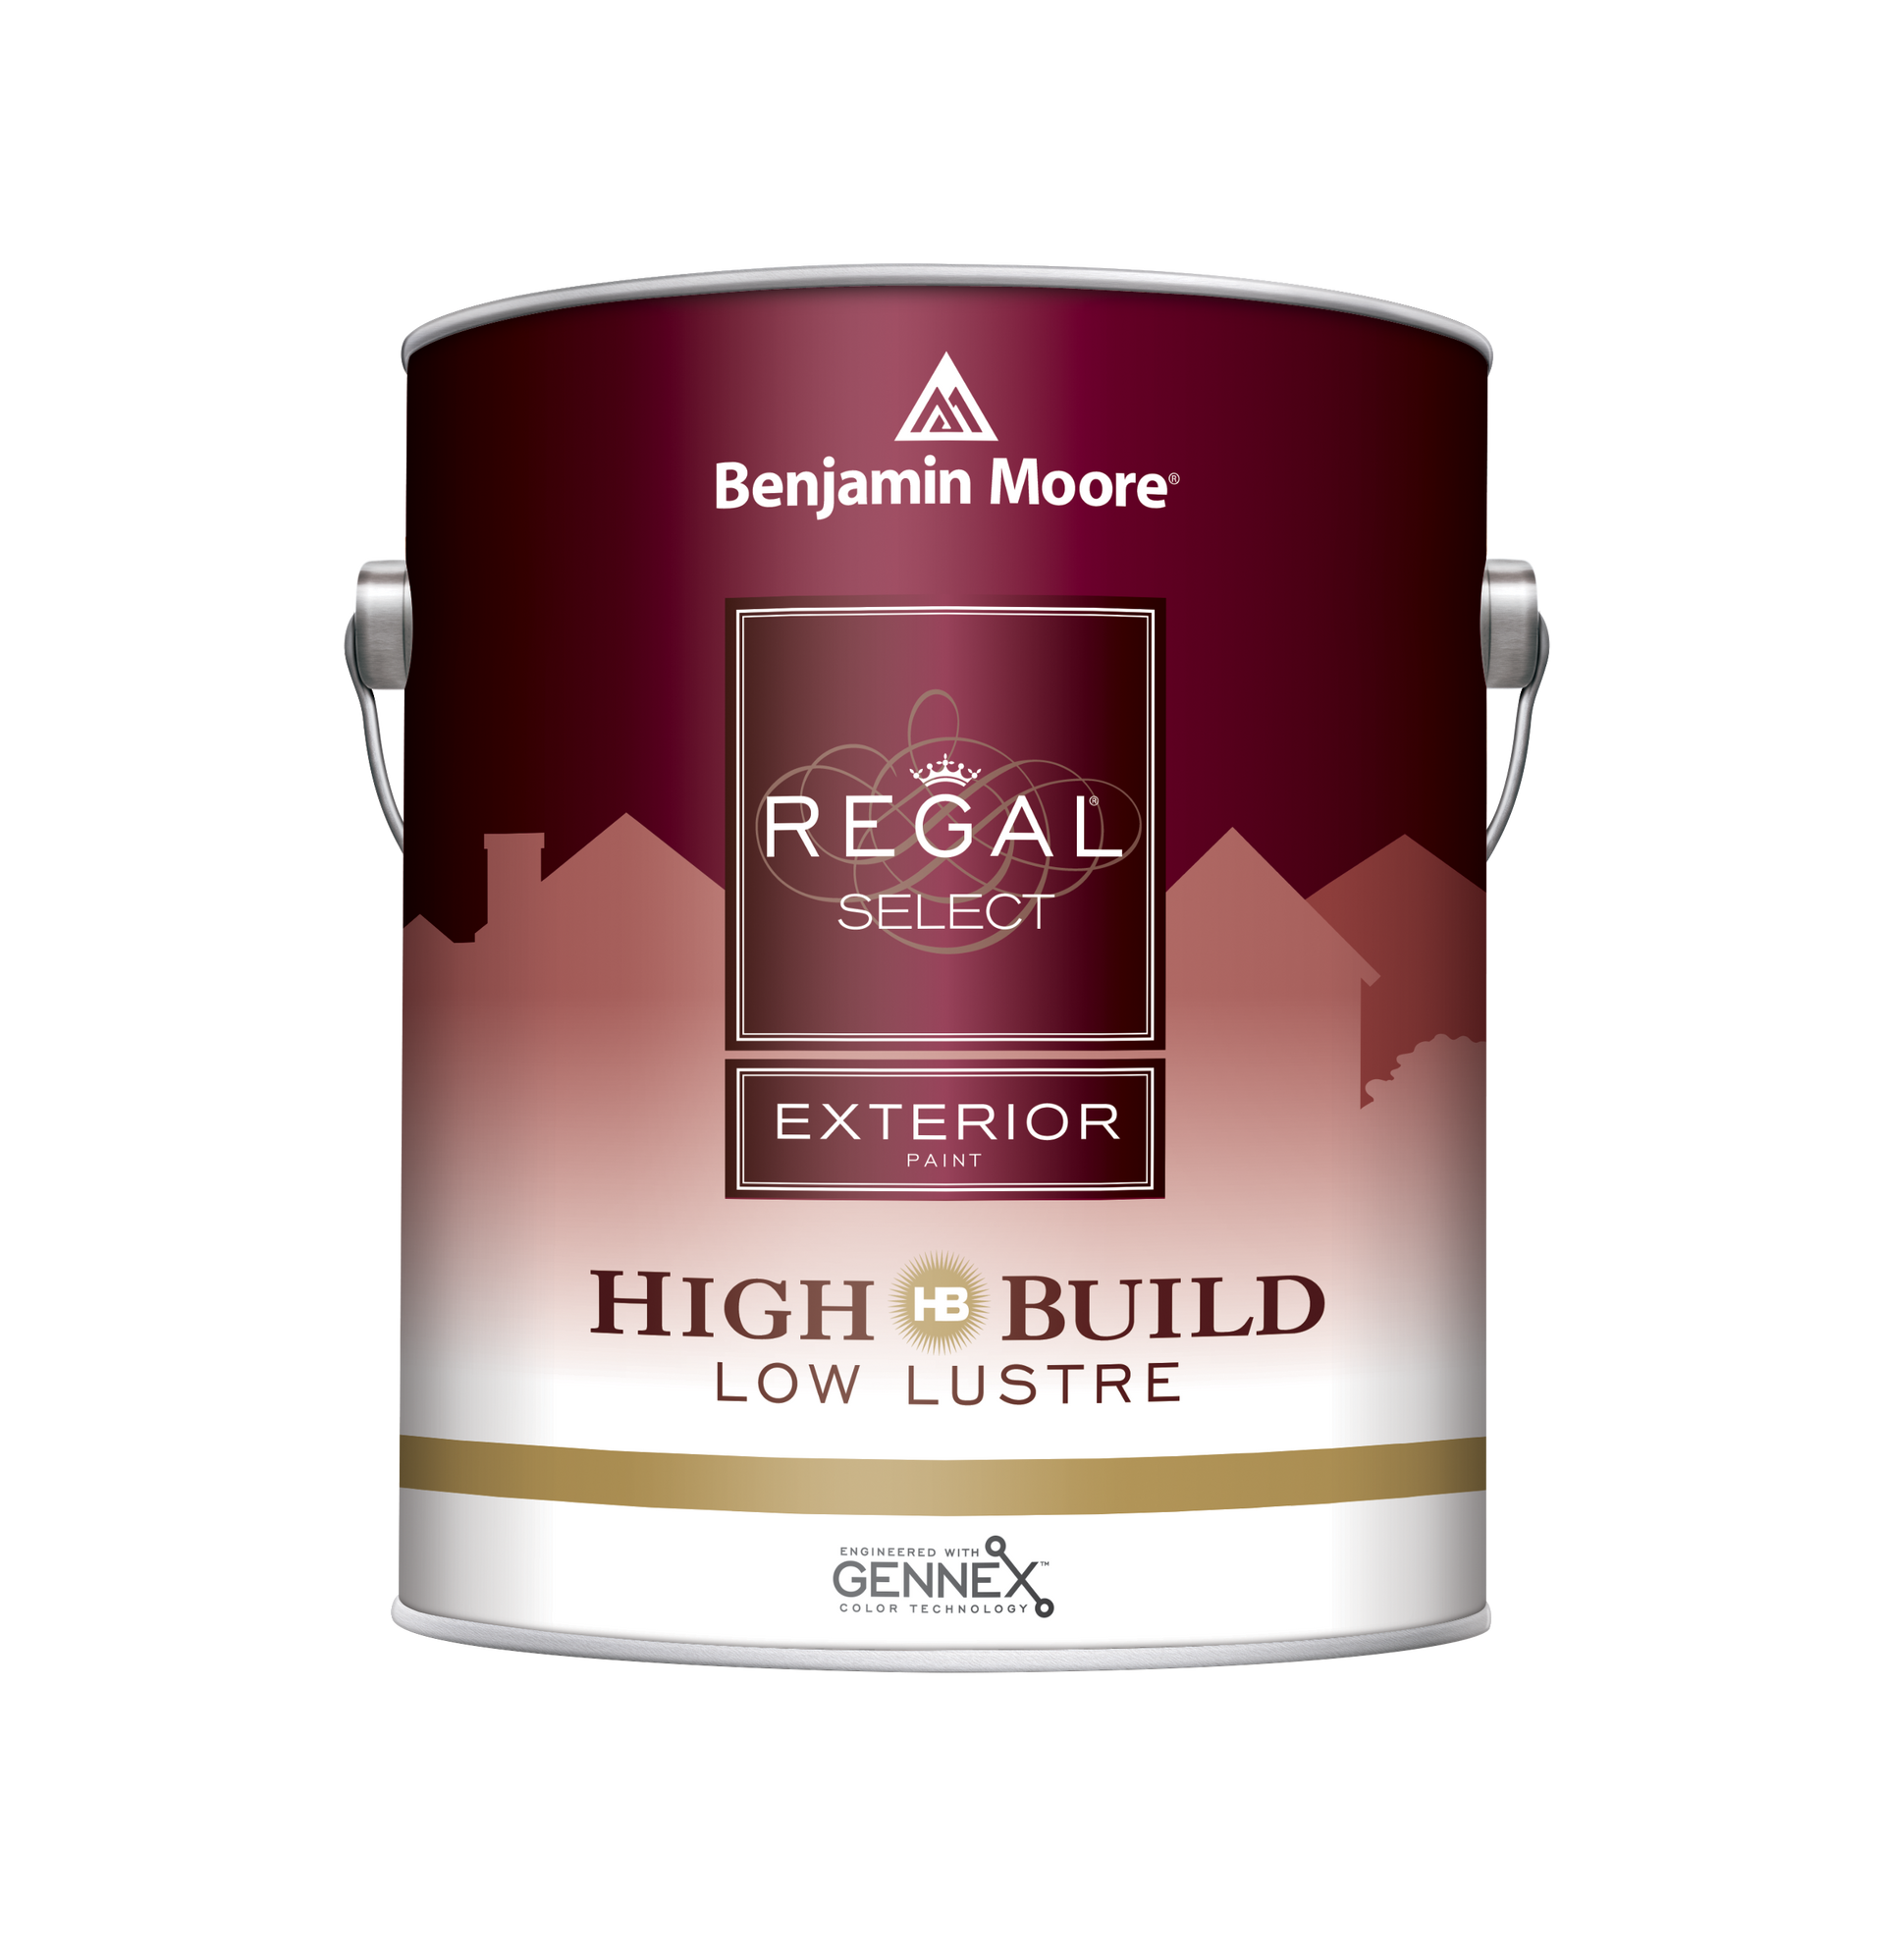 Image of can of Regal® Select Exterior High Build Paint